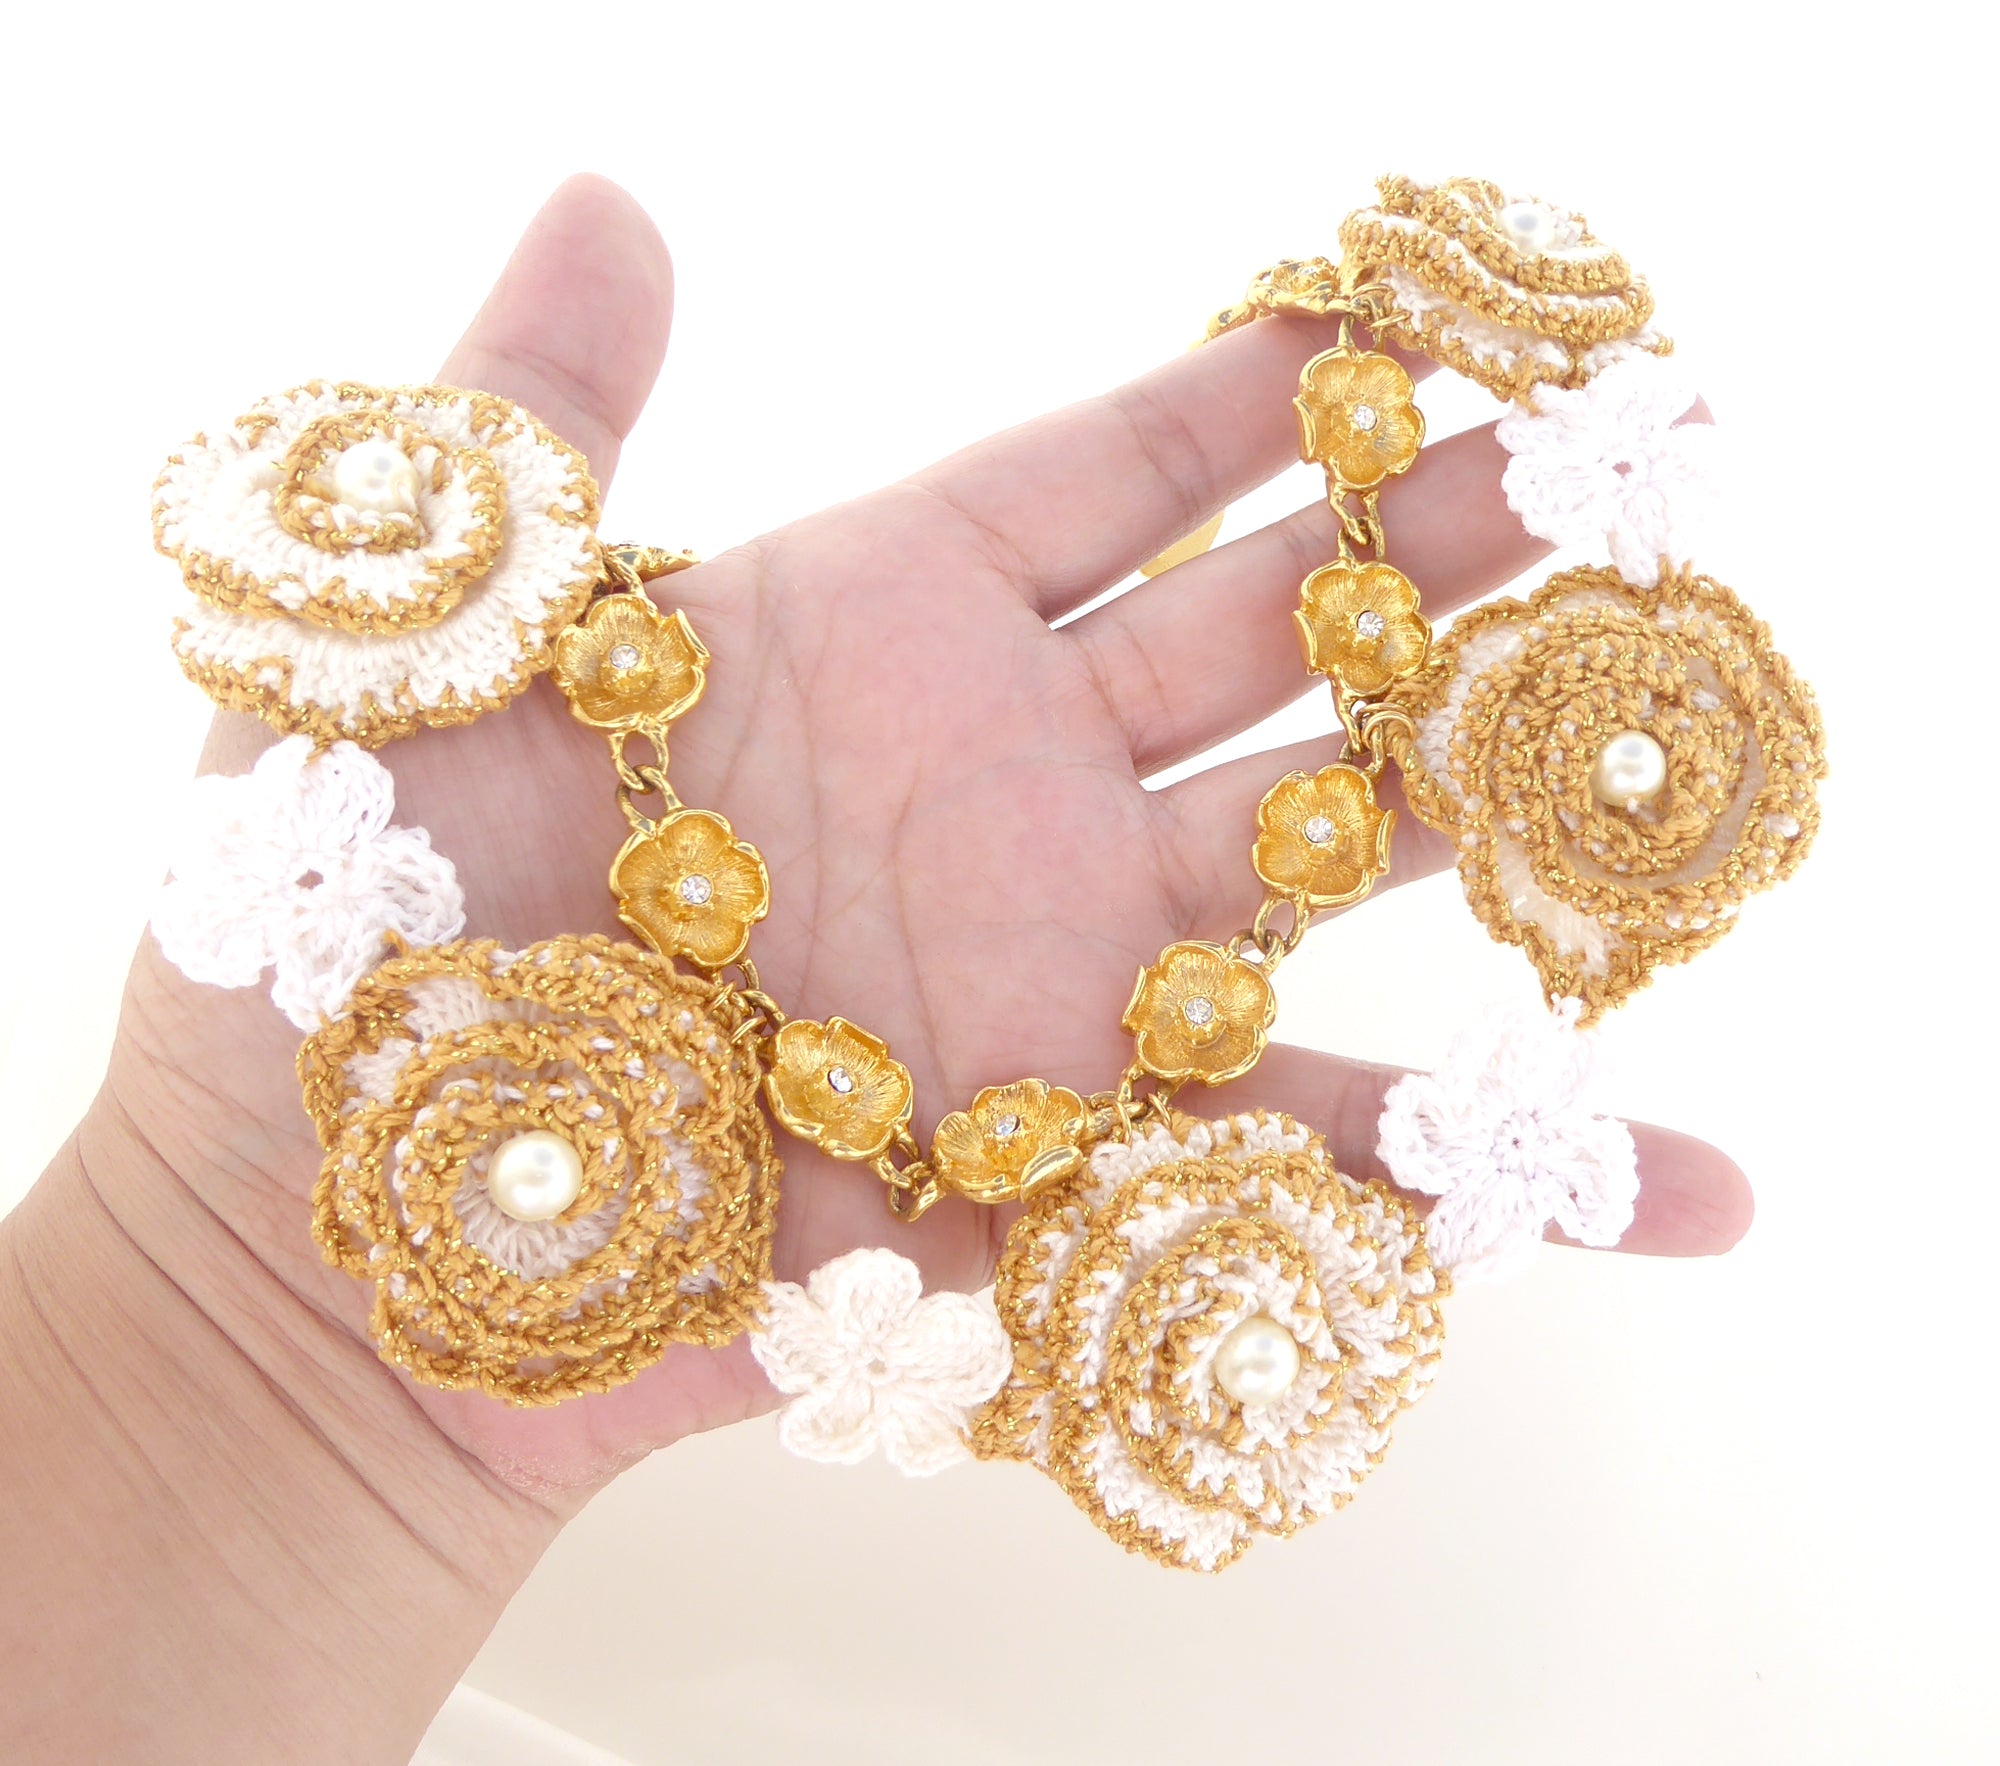 Gold and white crochet flower necklace by Jenny Dayco 8